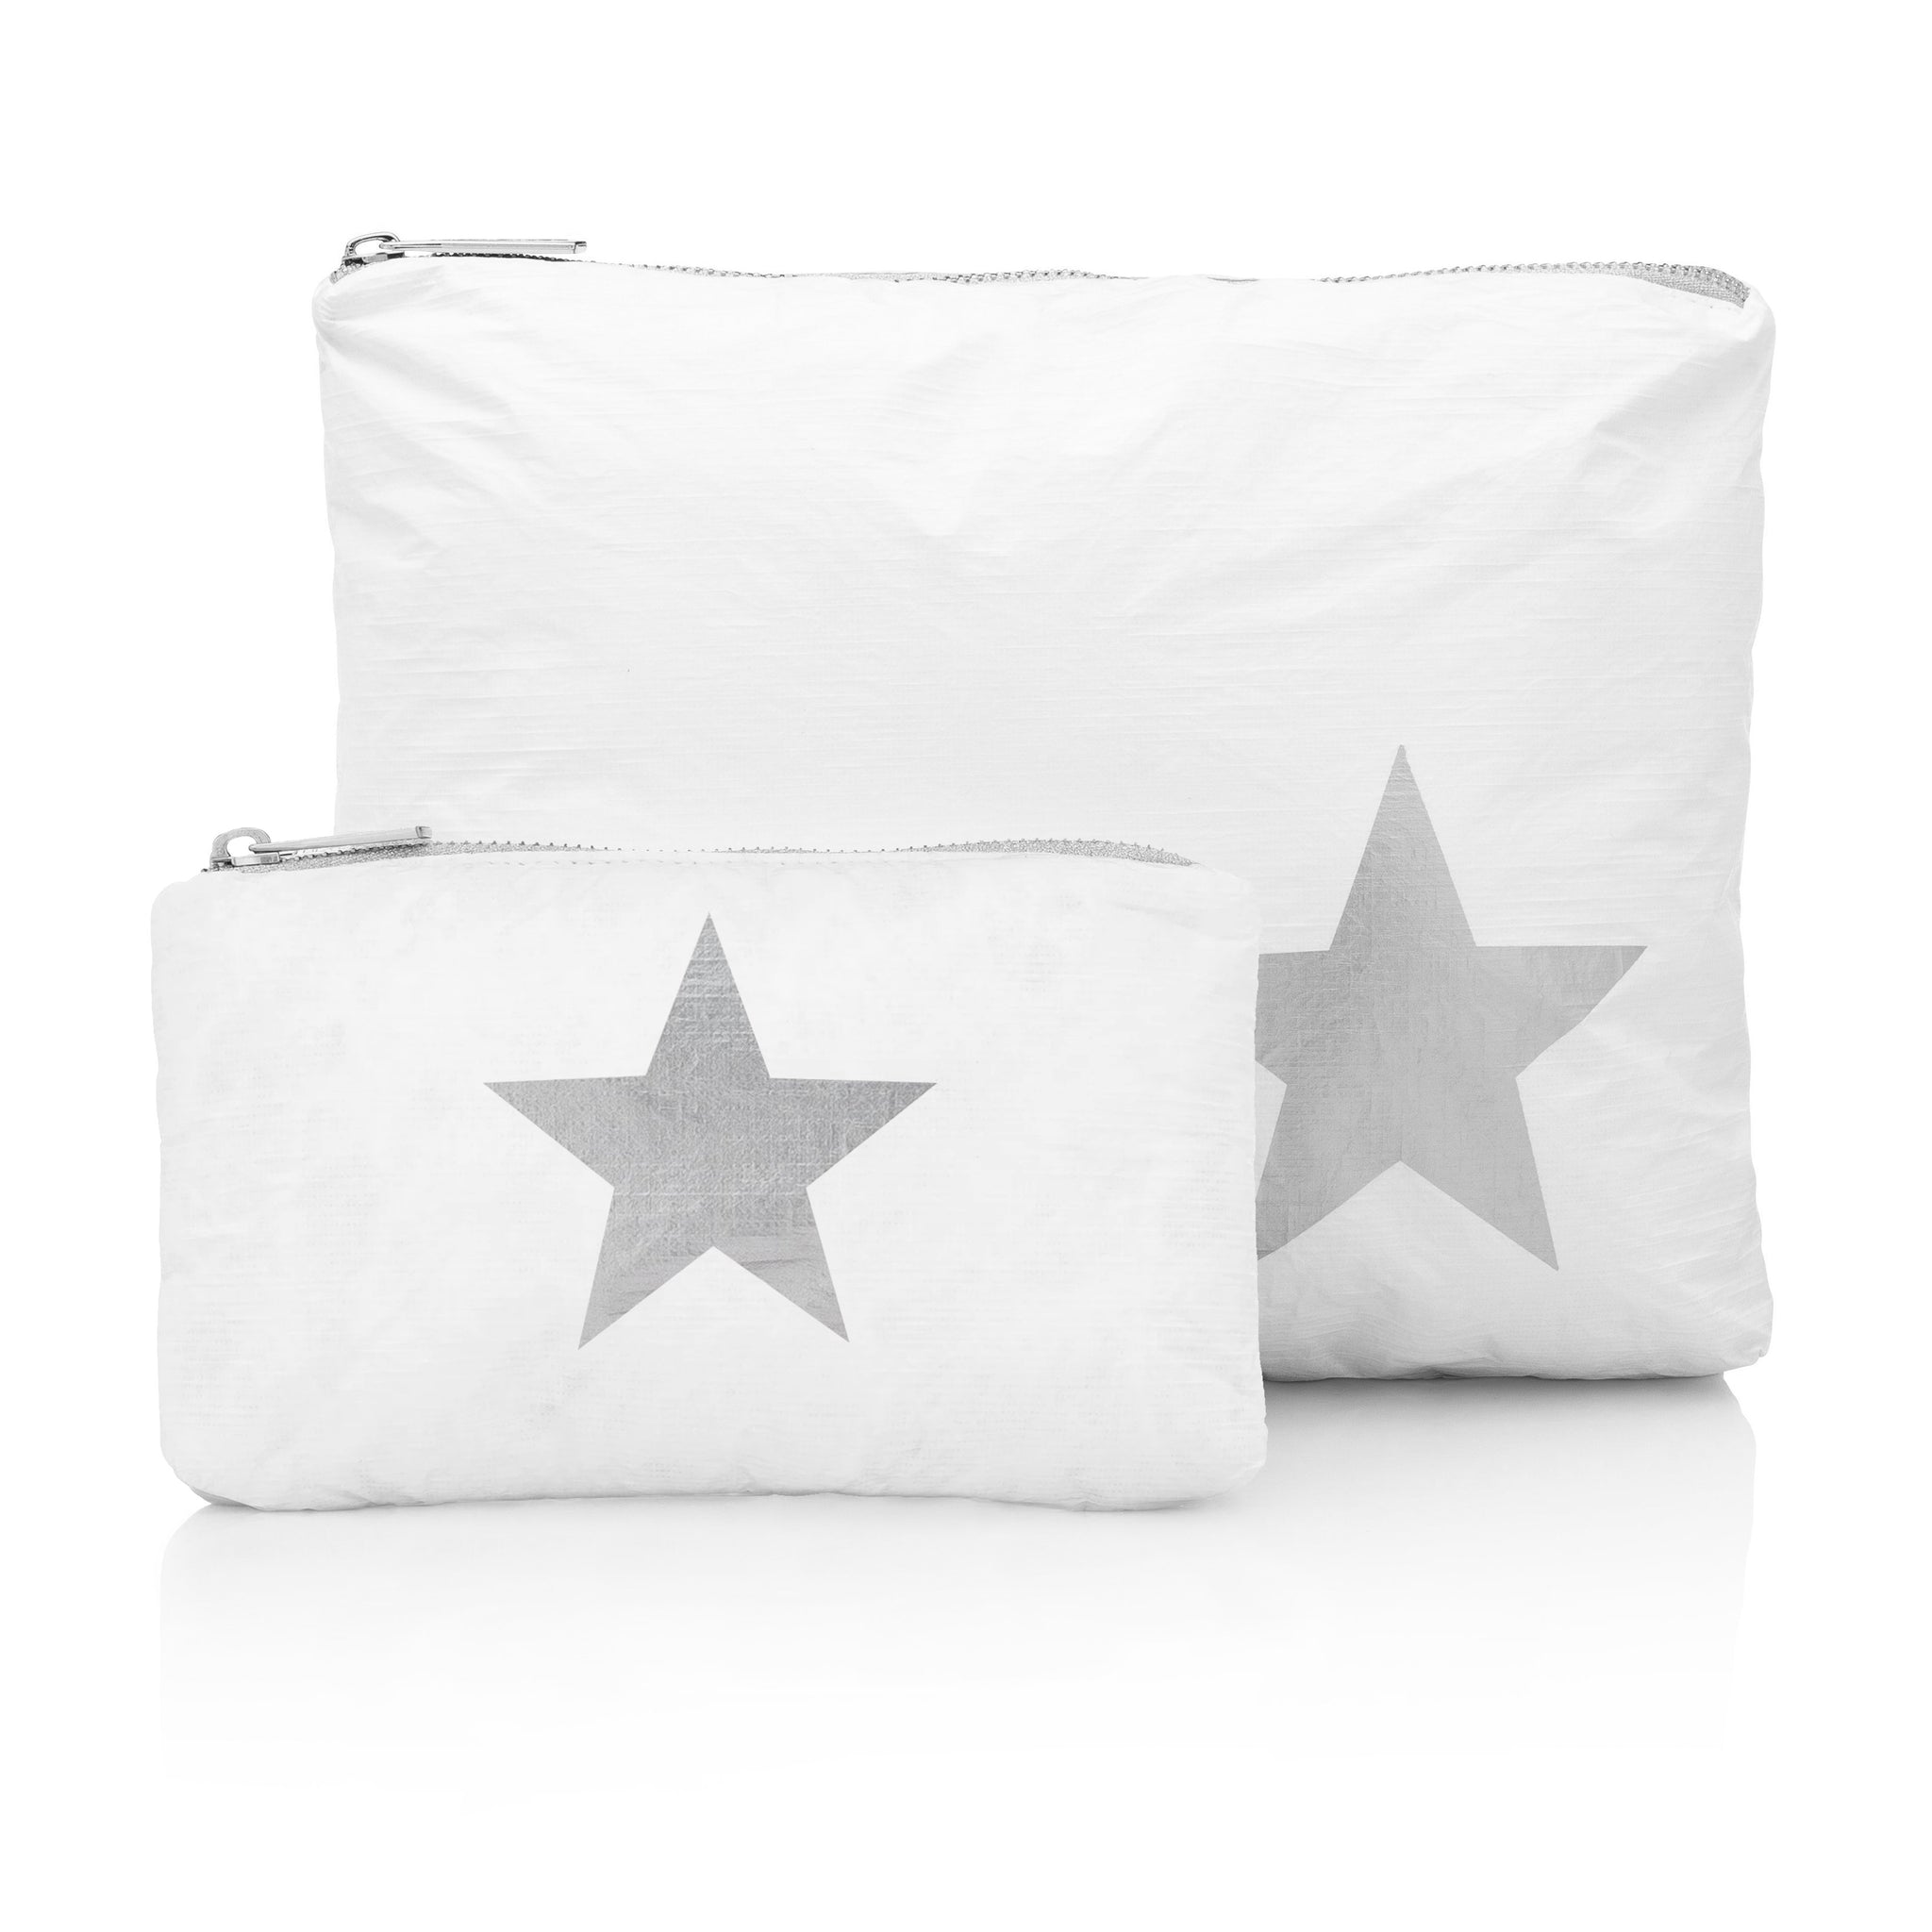 Set of Two - Organizational Packs - Shimmer White with Silver Star